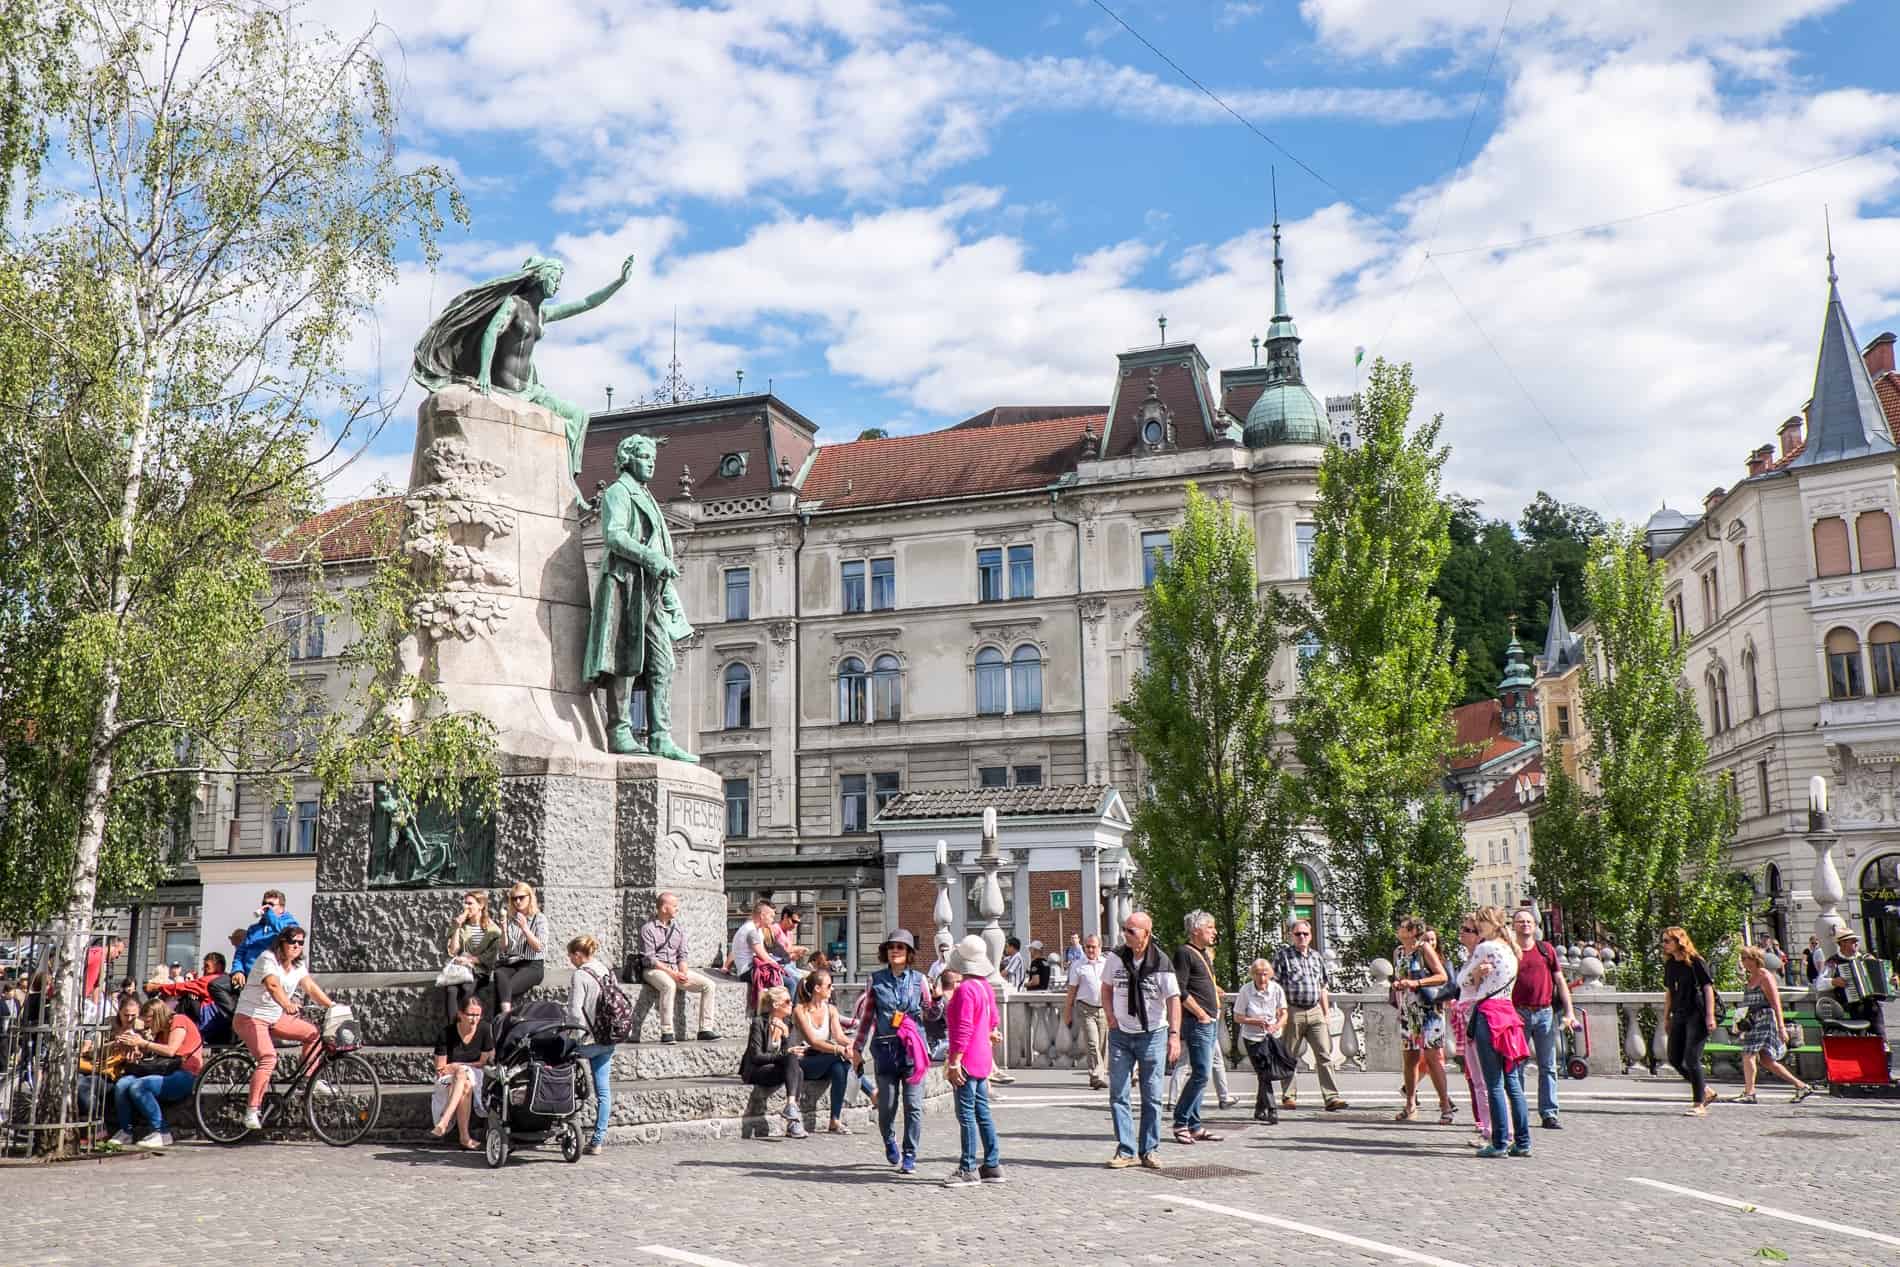 Mint green statues, a square full of people and the white washed buildings of Ljubljana Old Town.